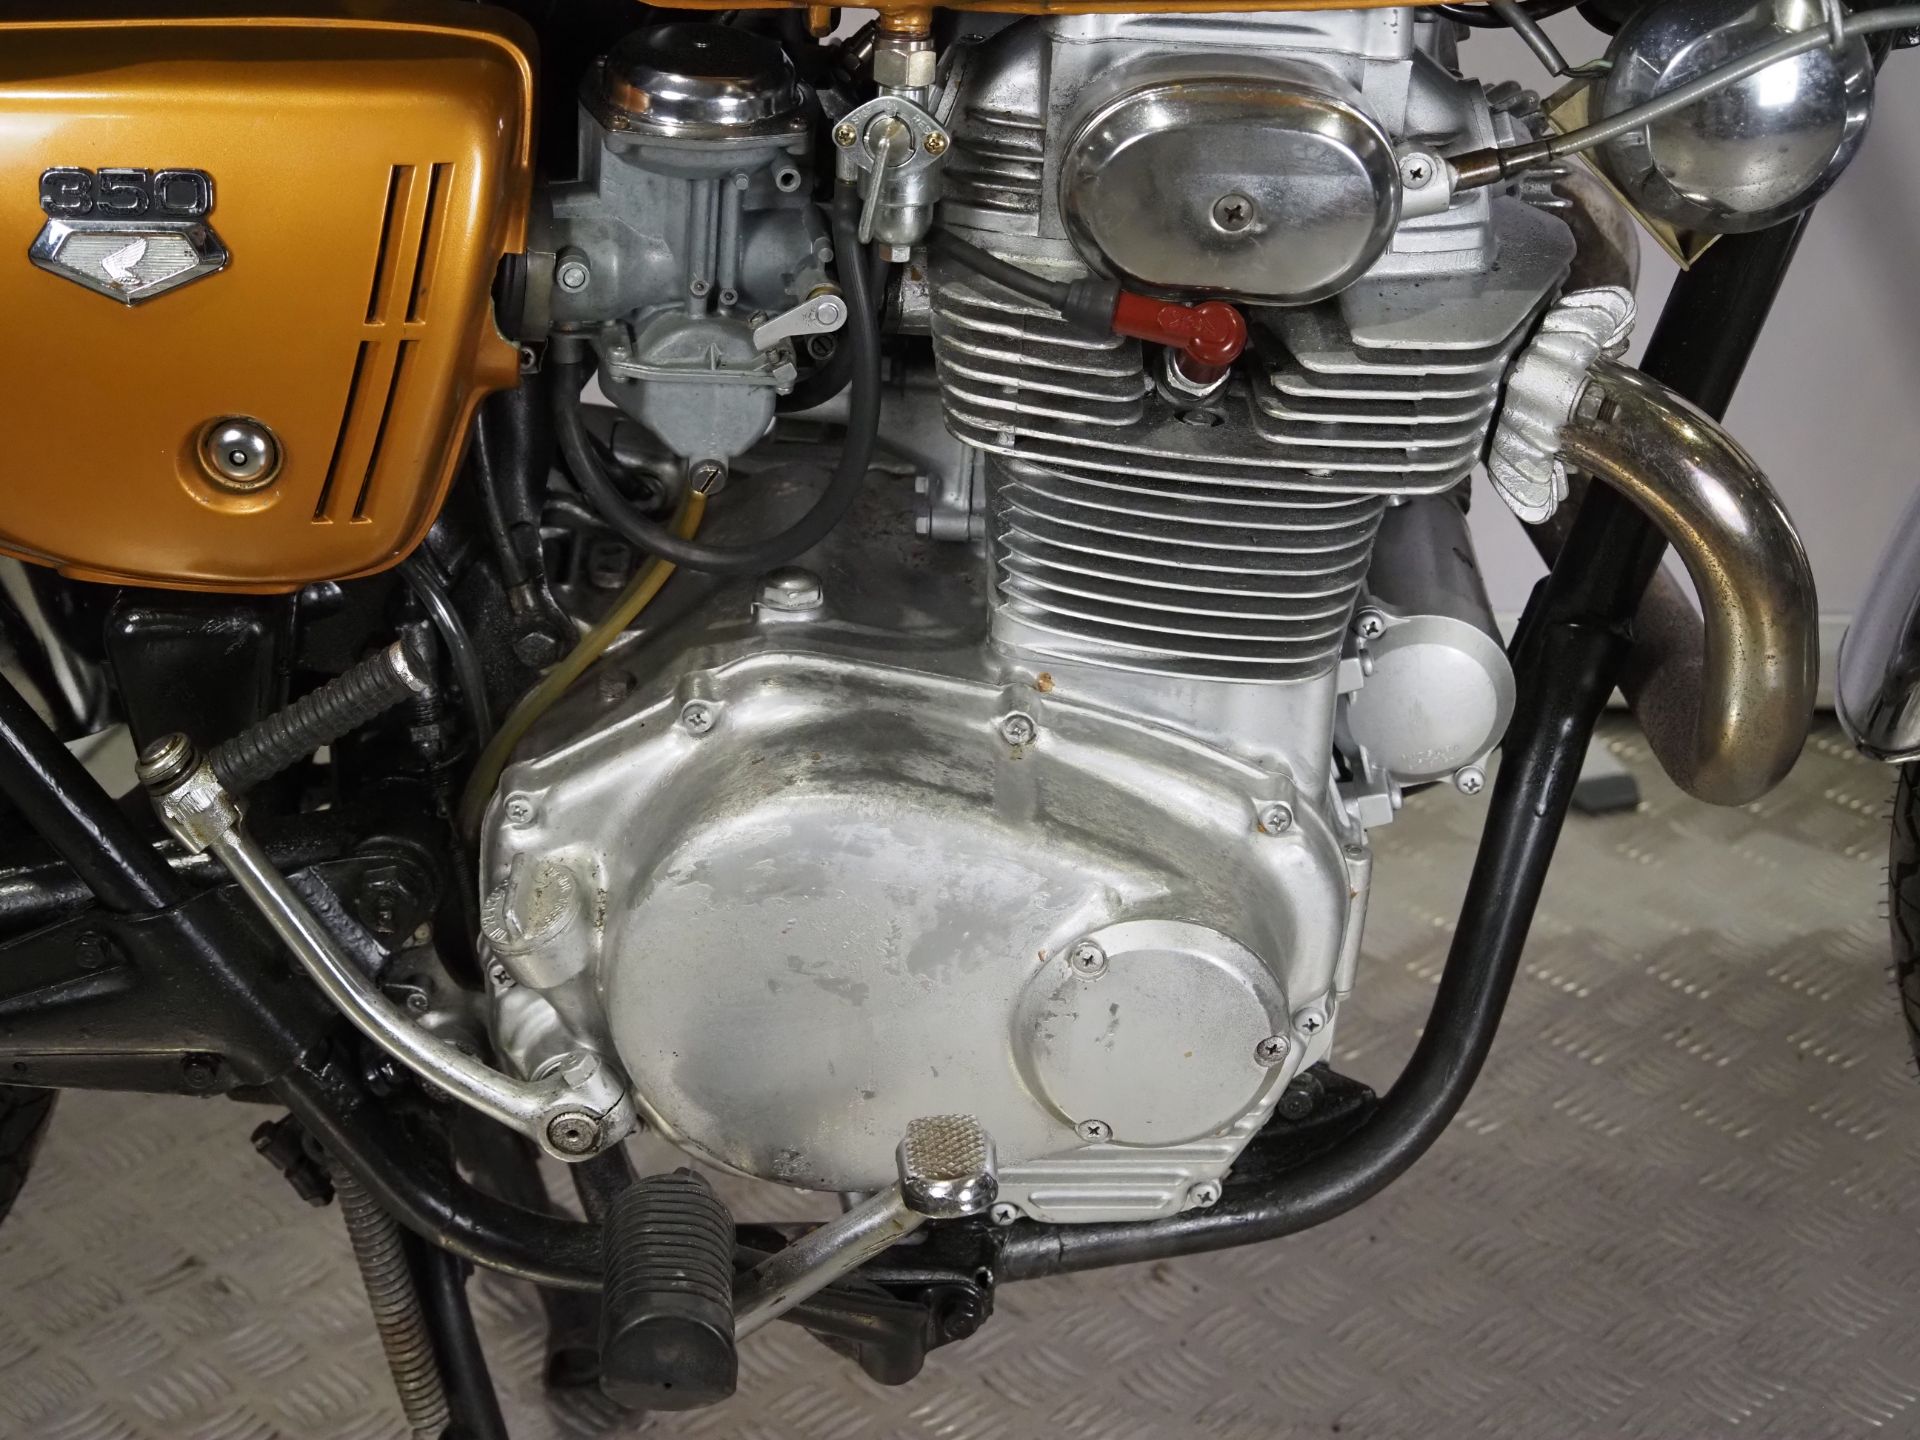 Honda CL350 motorcycle. 1971. 325ccRuns and rides. New tyres and tubes, new battery, carburettors - Image 4 of 6